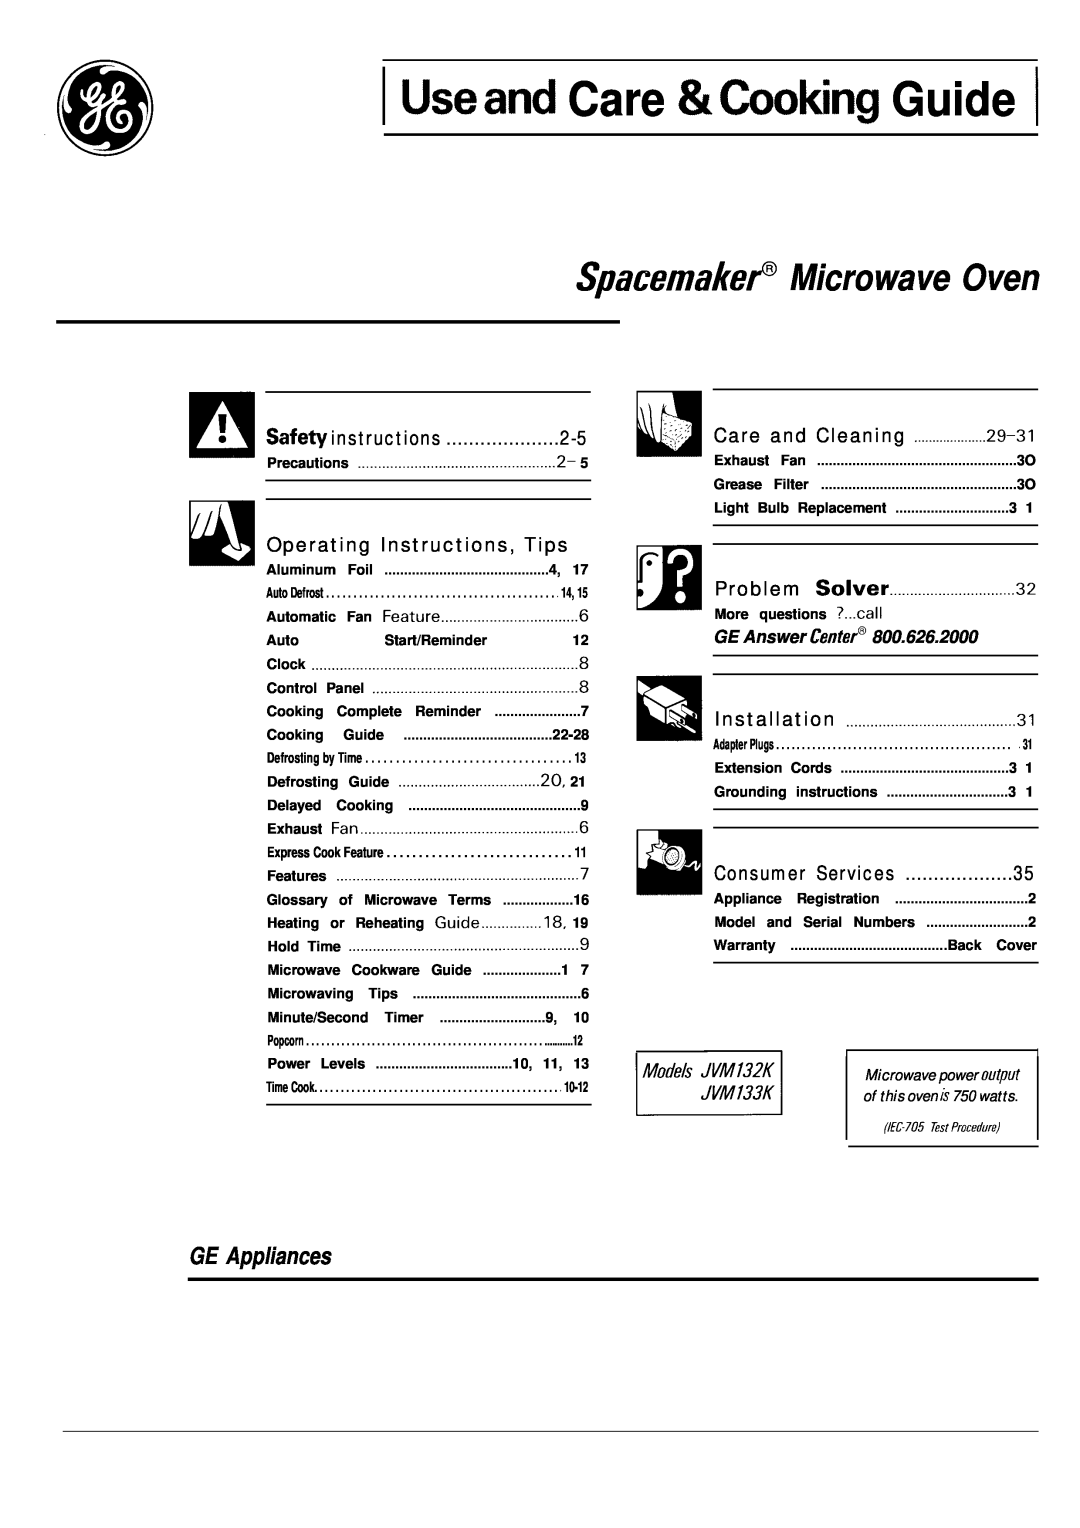 GE 49-8284 warranty Useand Care &tioking Guide, SpacemakeP Microwave Oven, GE Appliances, Operating Instructions, Tips 